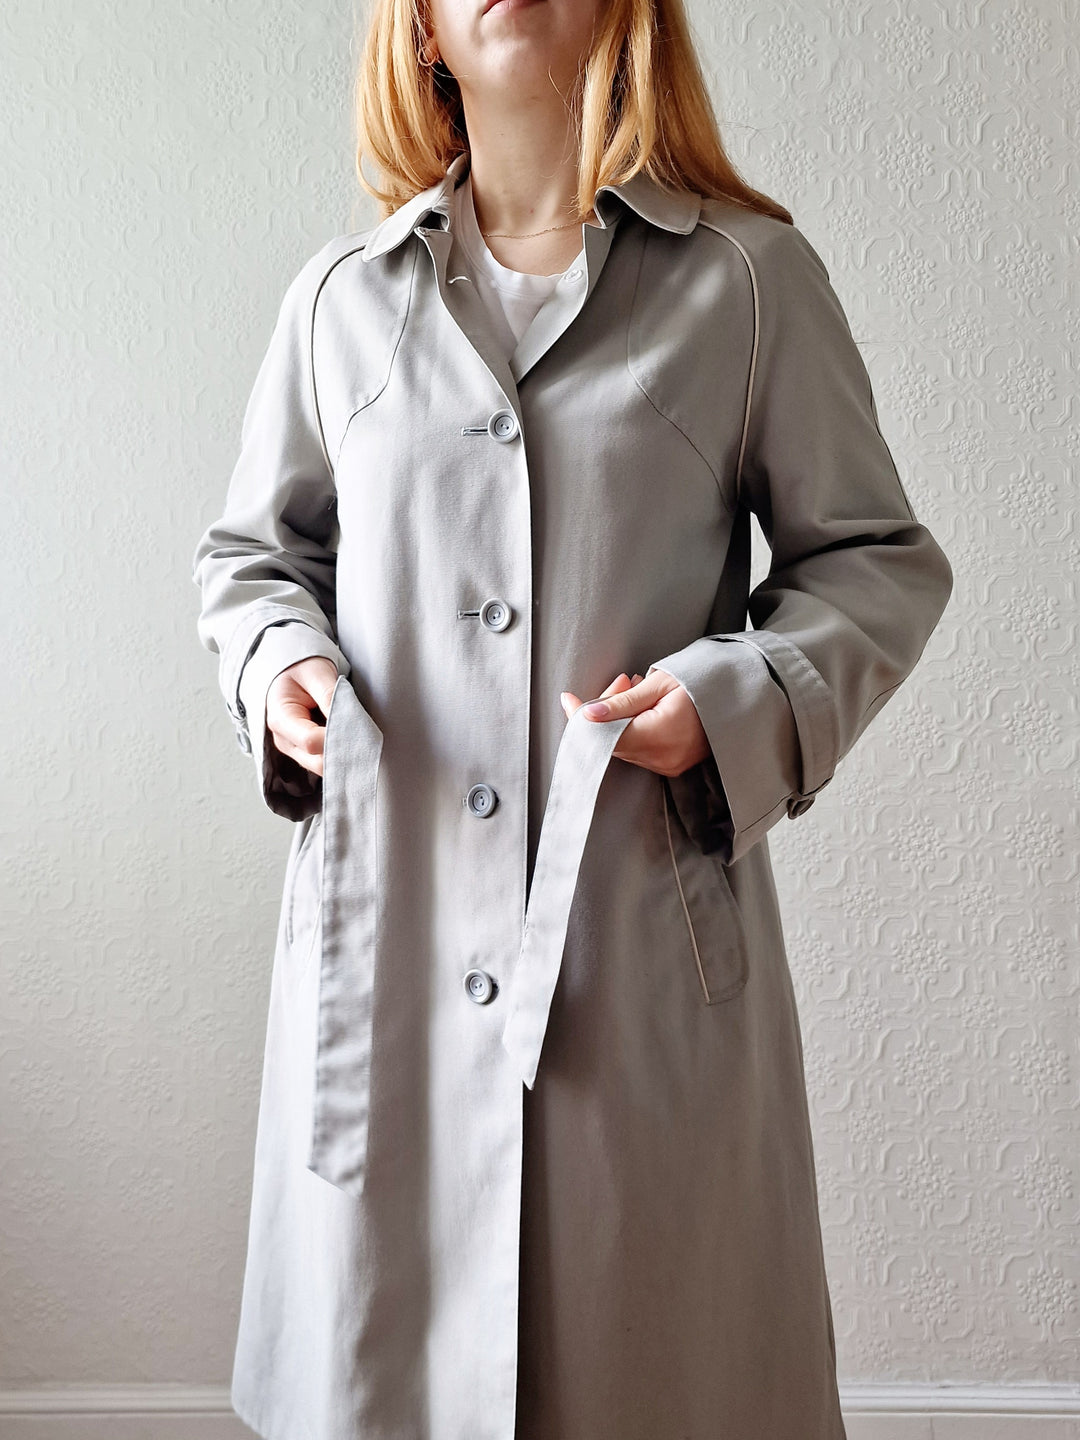 Vintage Lightweight Grey Single Breasted Trench Coat with Belt - S